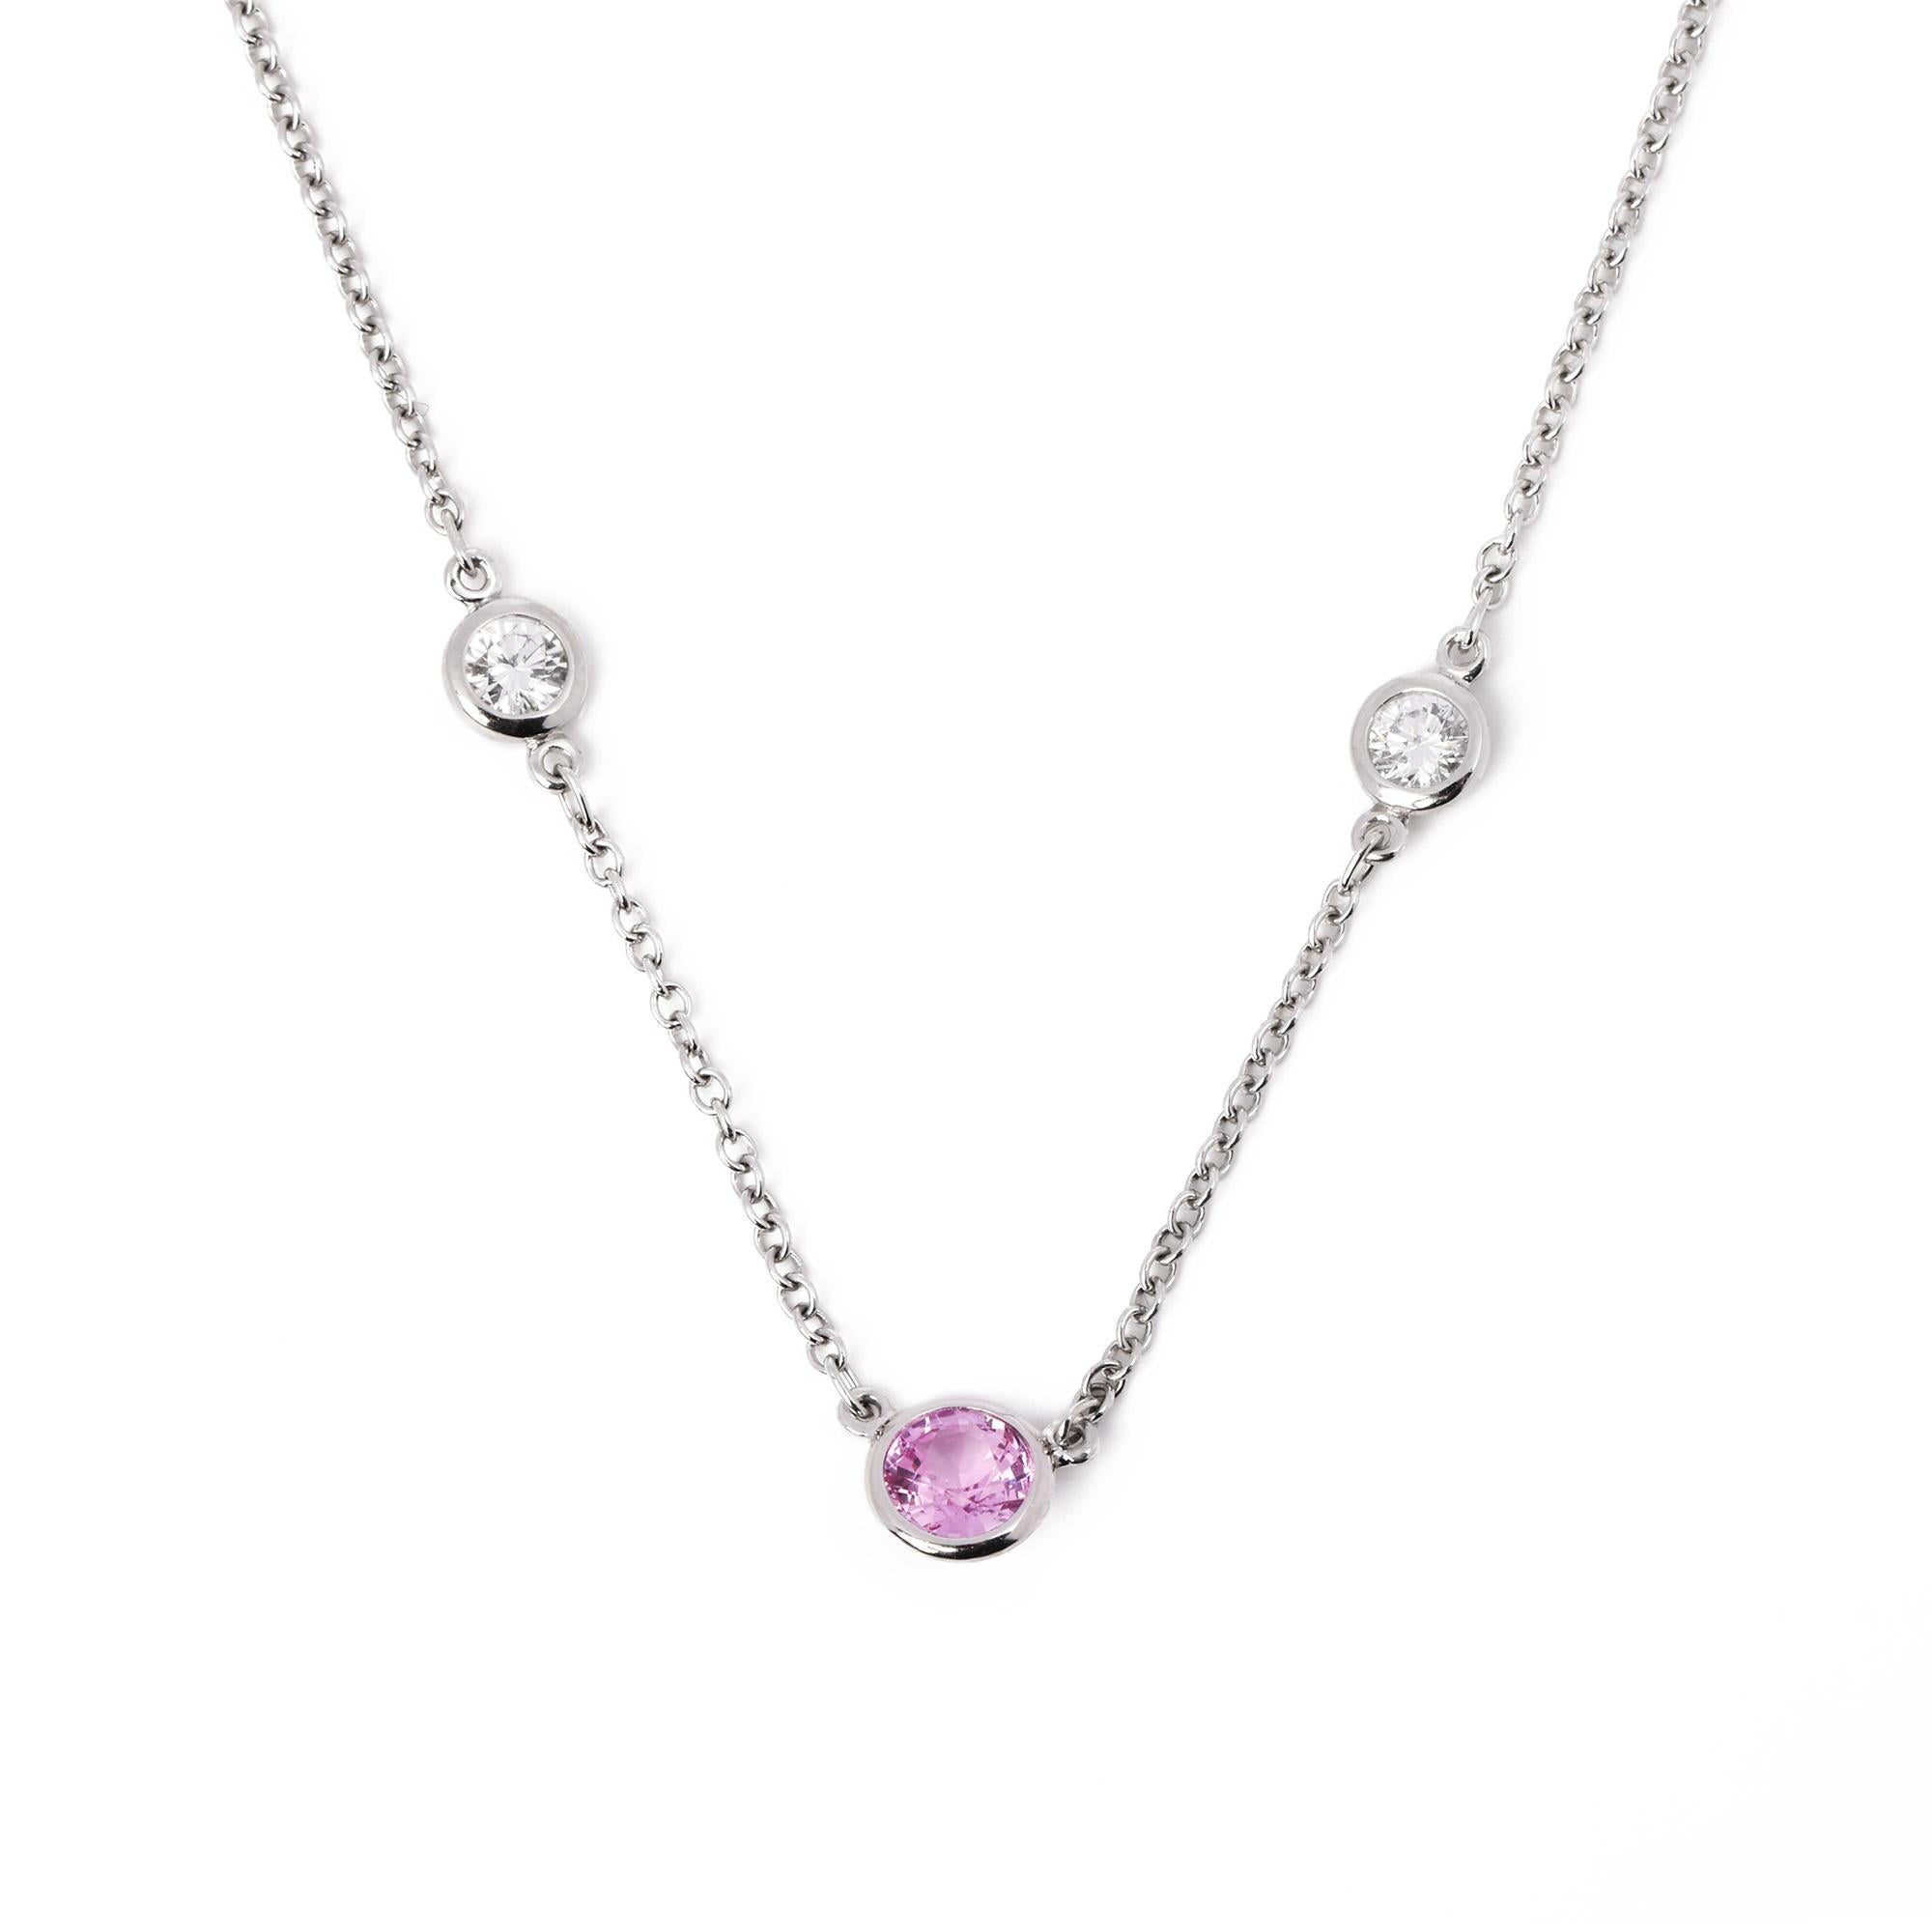 Contemporary Tiffany & Co. Colours by the Yard Pink Sapphire and Diamond Necklace